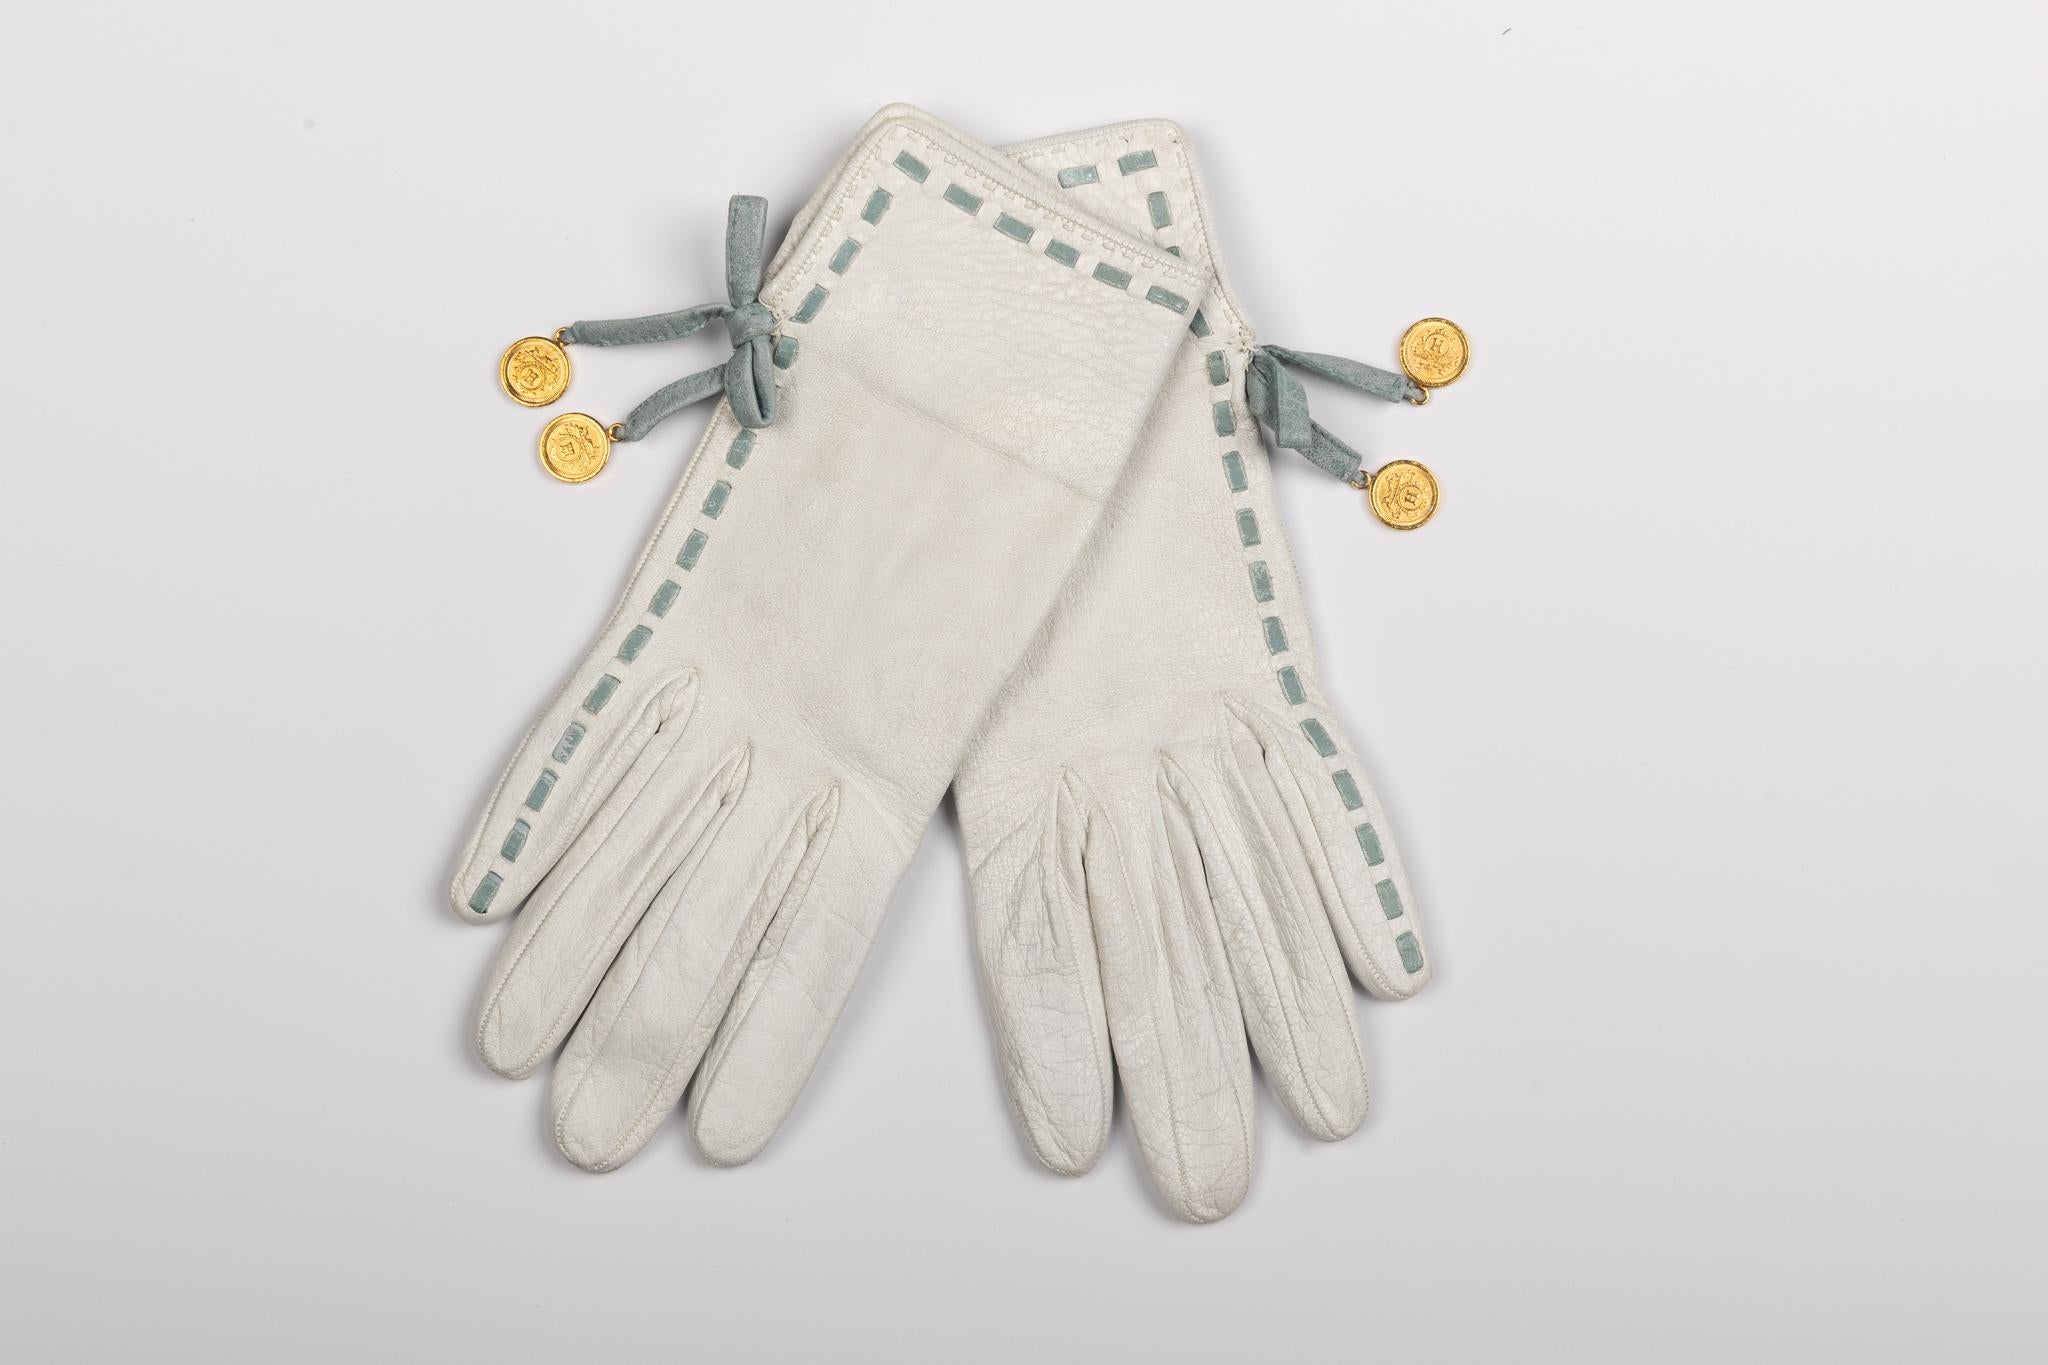 Hermes vintage 2 tone ladies gloves. White leather with celeste details and gold coins. Size 6. Come with original box.